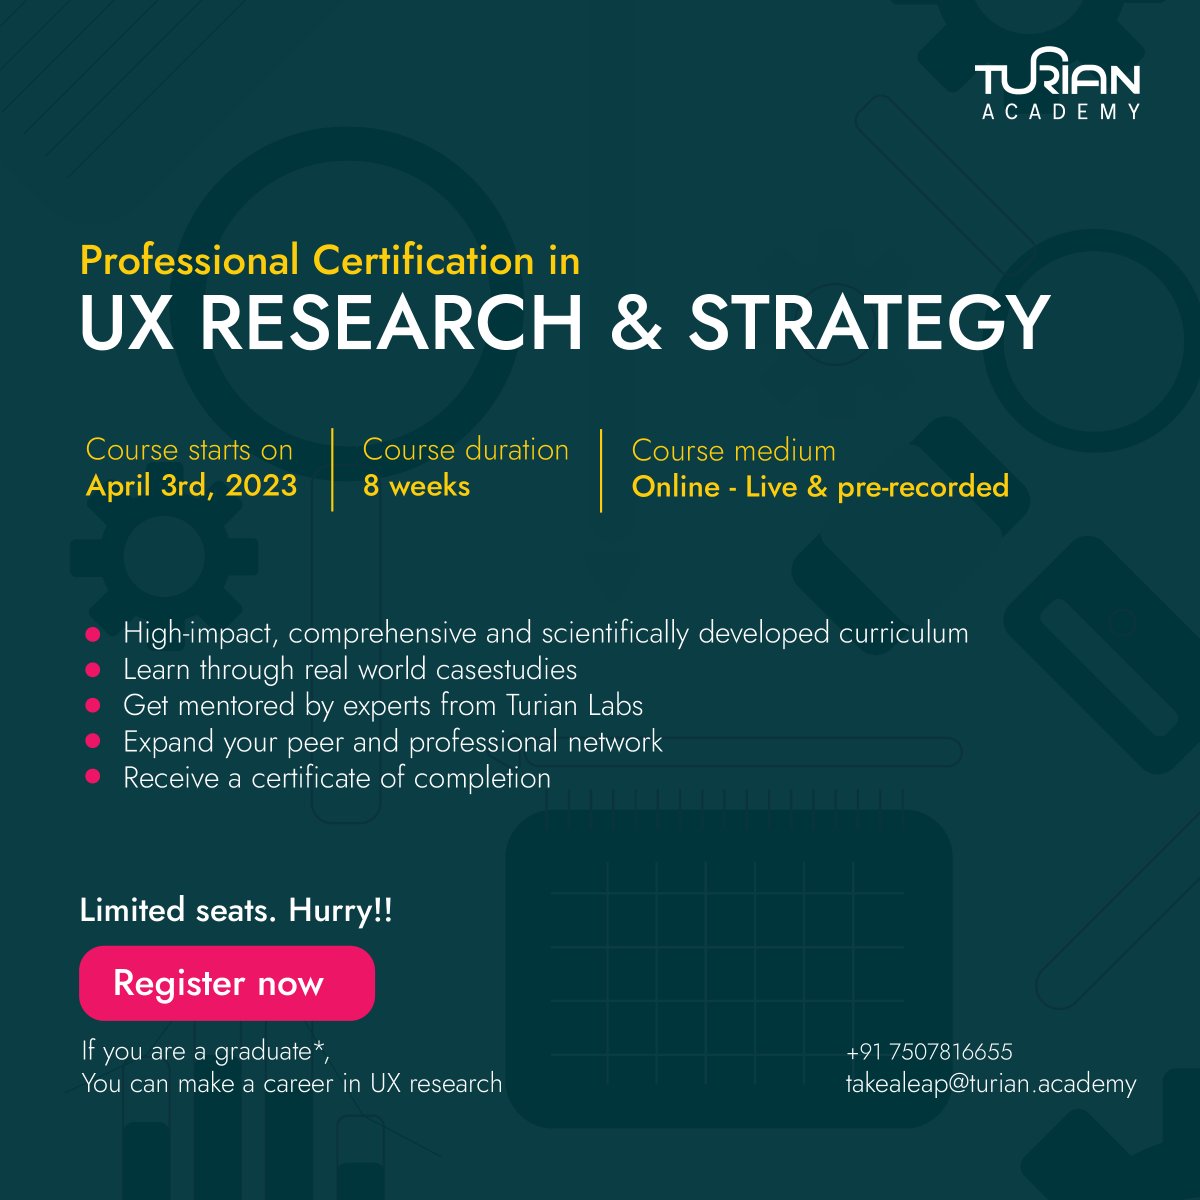 Apply for the UX Research certification programme by Turian Academy.
The next cohort starts on 3rd April.
Hurry! Limited seats.
Register on this link - lnkd.in/dKTaBK_y

#userexperienceresearch #uxresearch #elearning #uxcourse #designthinking #edtech #takealeap